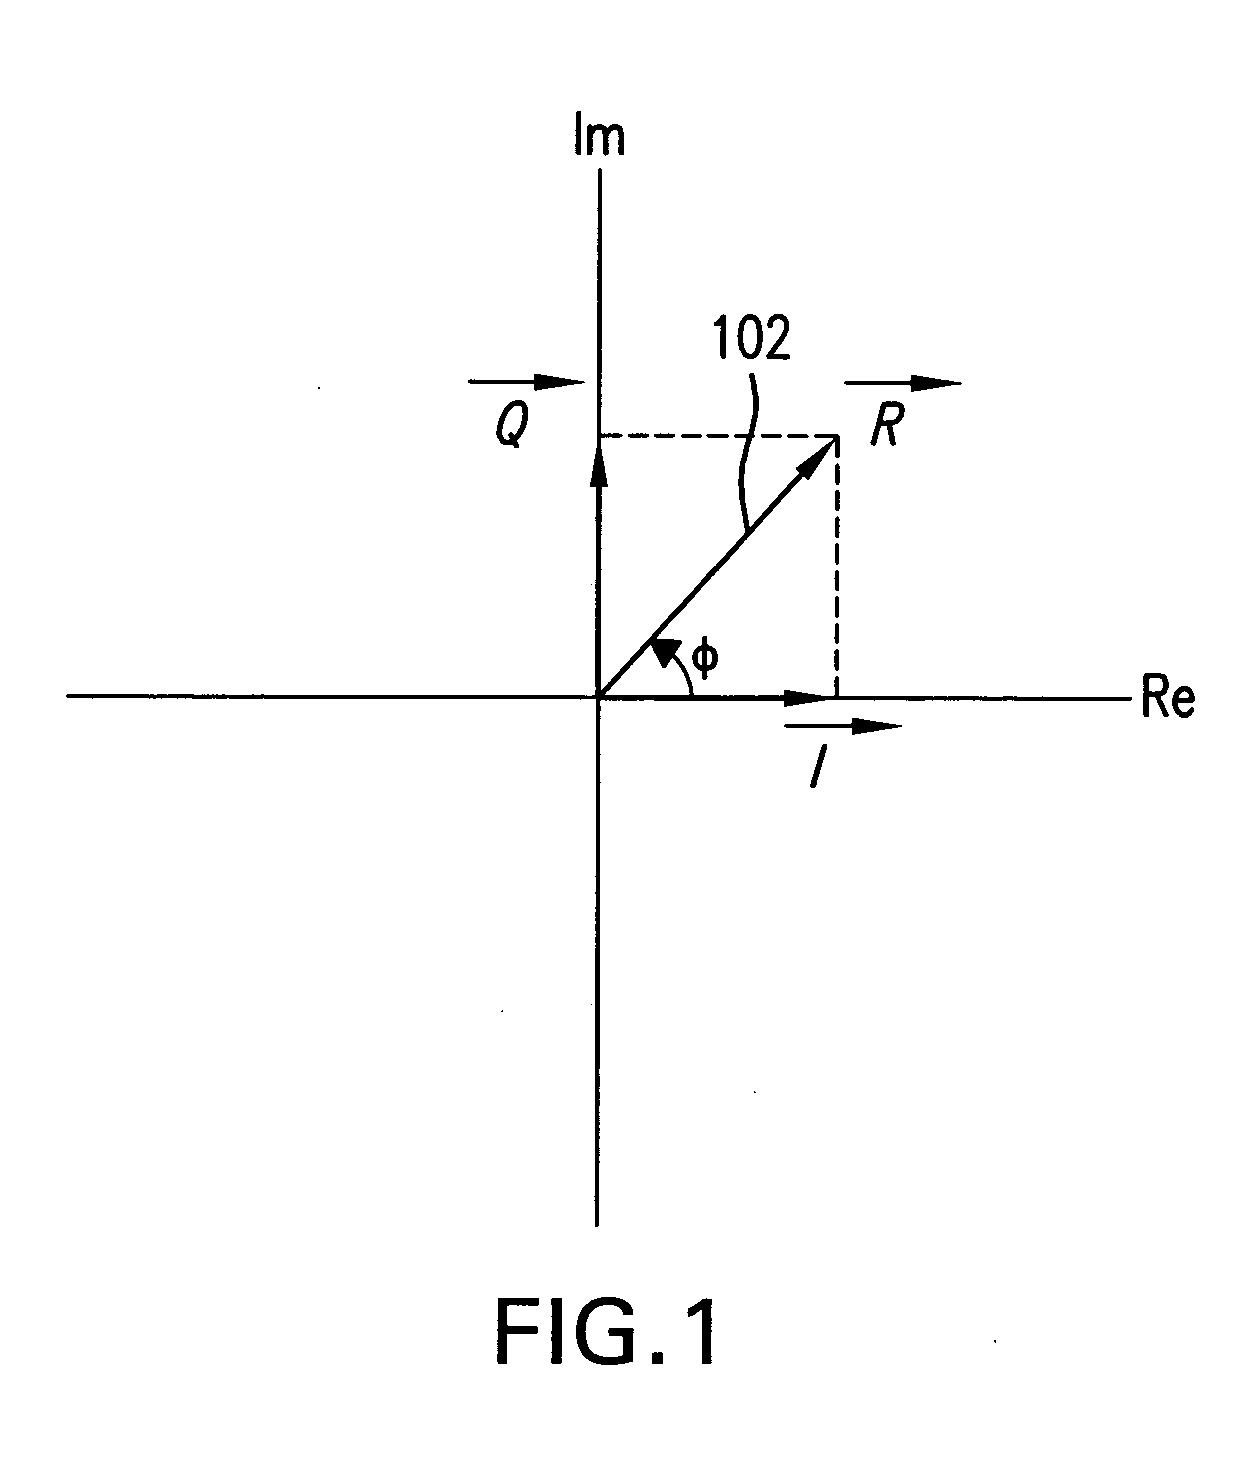 Systems and methods of RF power transmission, modulation and amplification, including embodiments for compensating for waveform distortion